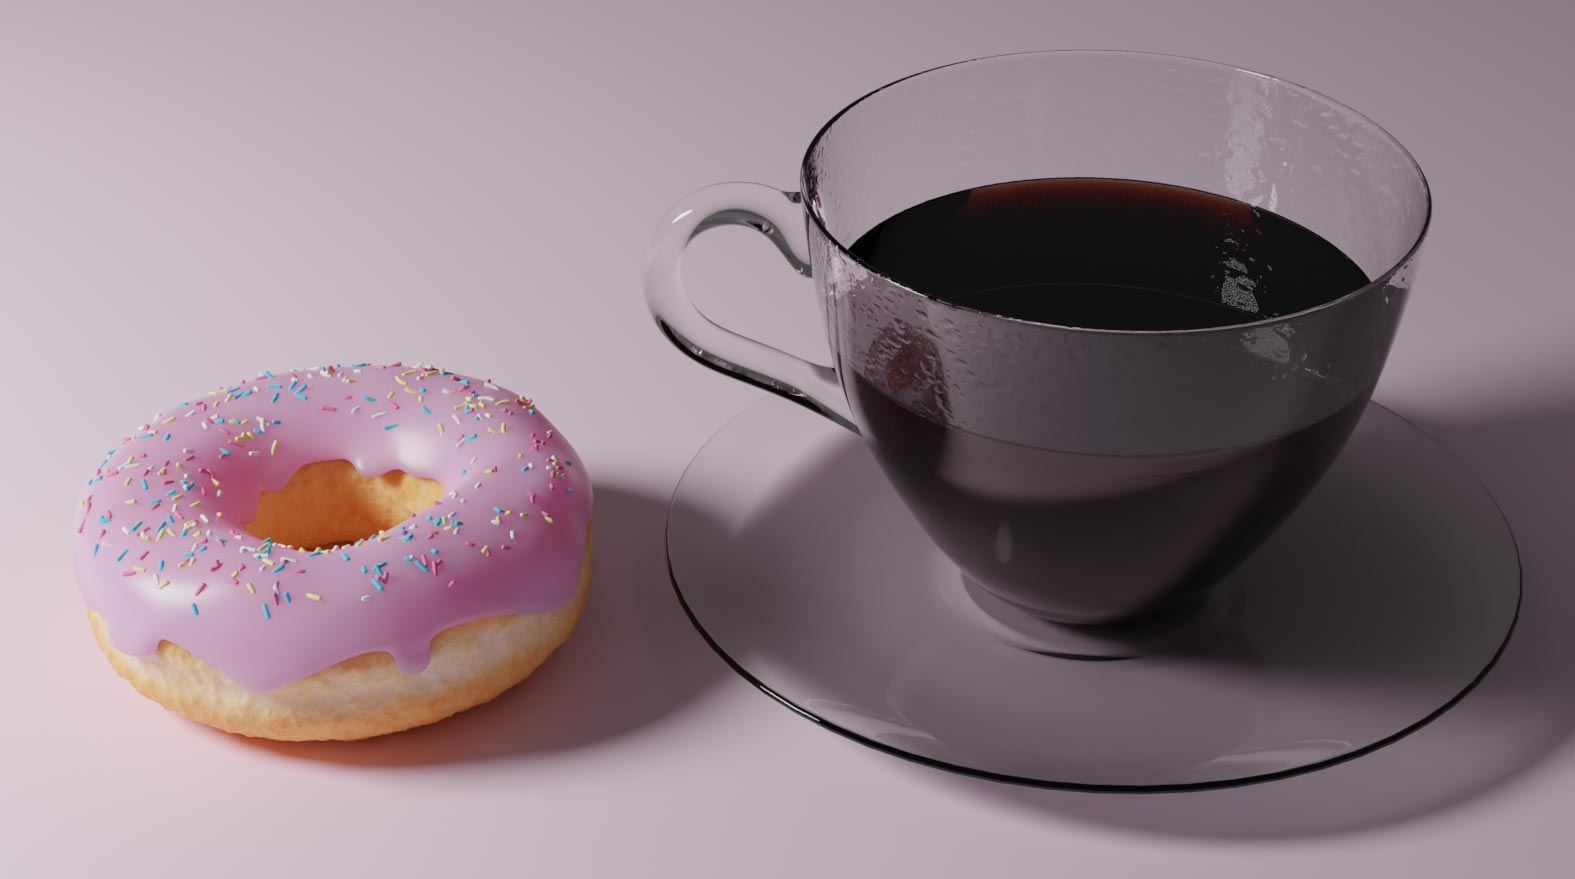 A 3d render of a donut with pink icing next to a glass cup with coffee on a light pink background.